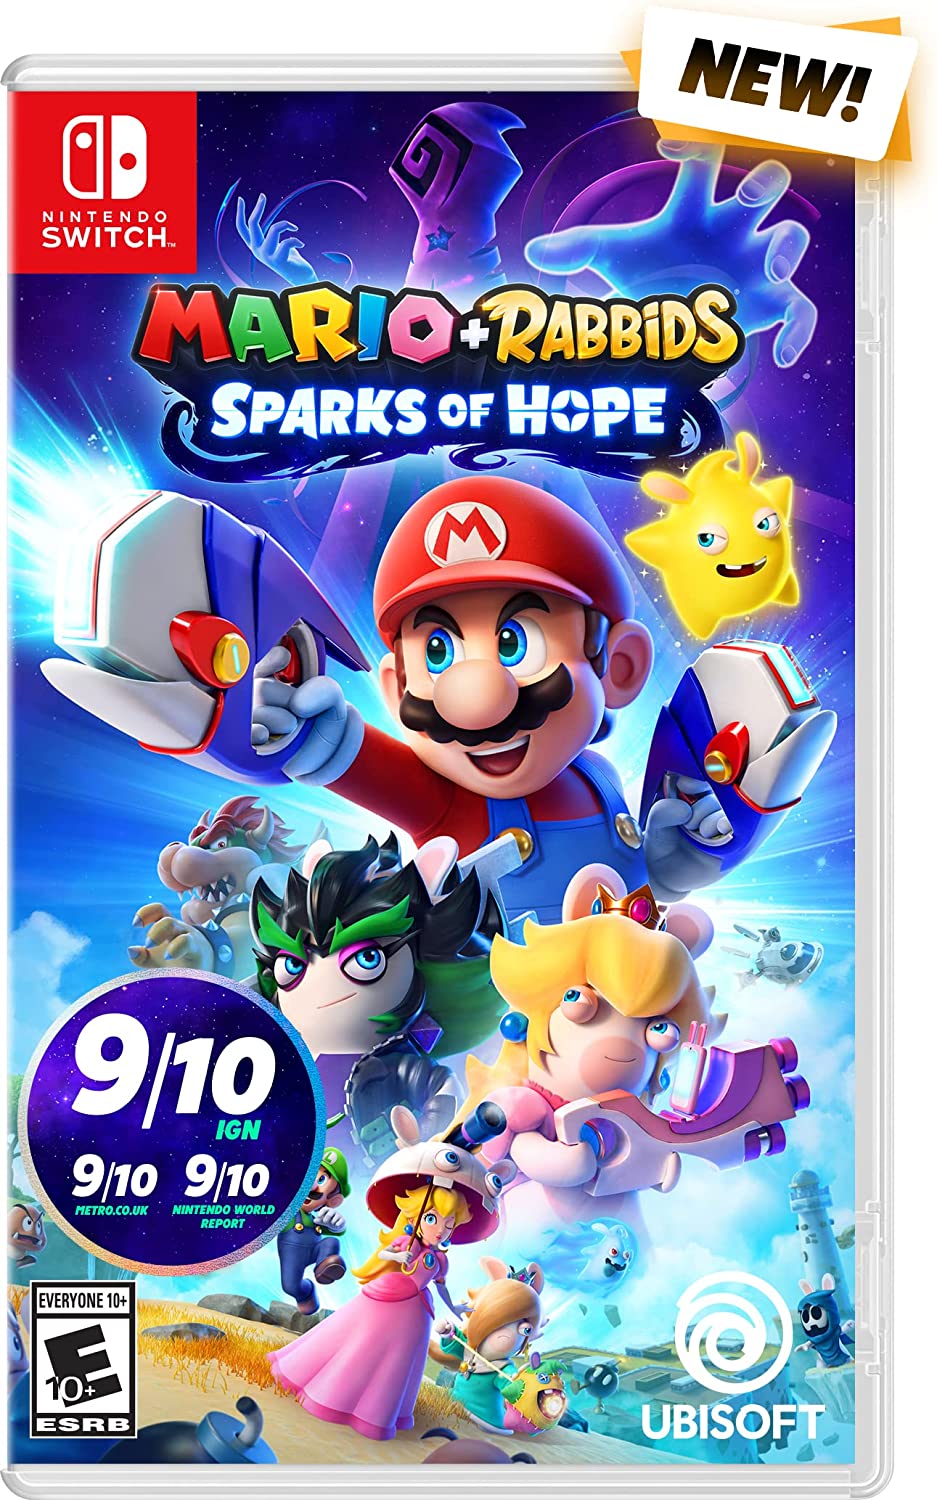 Mario + Rabbids Sparks of Hope (Nintendo Switch) $30 + Free Shipping